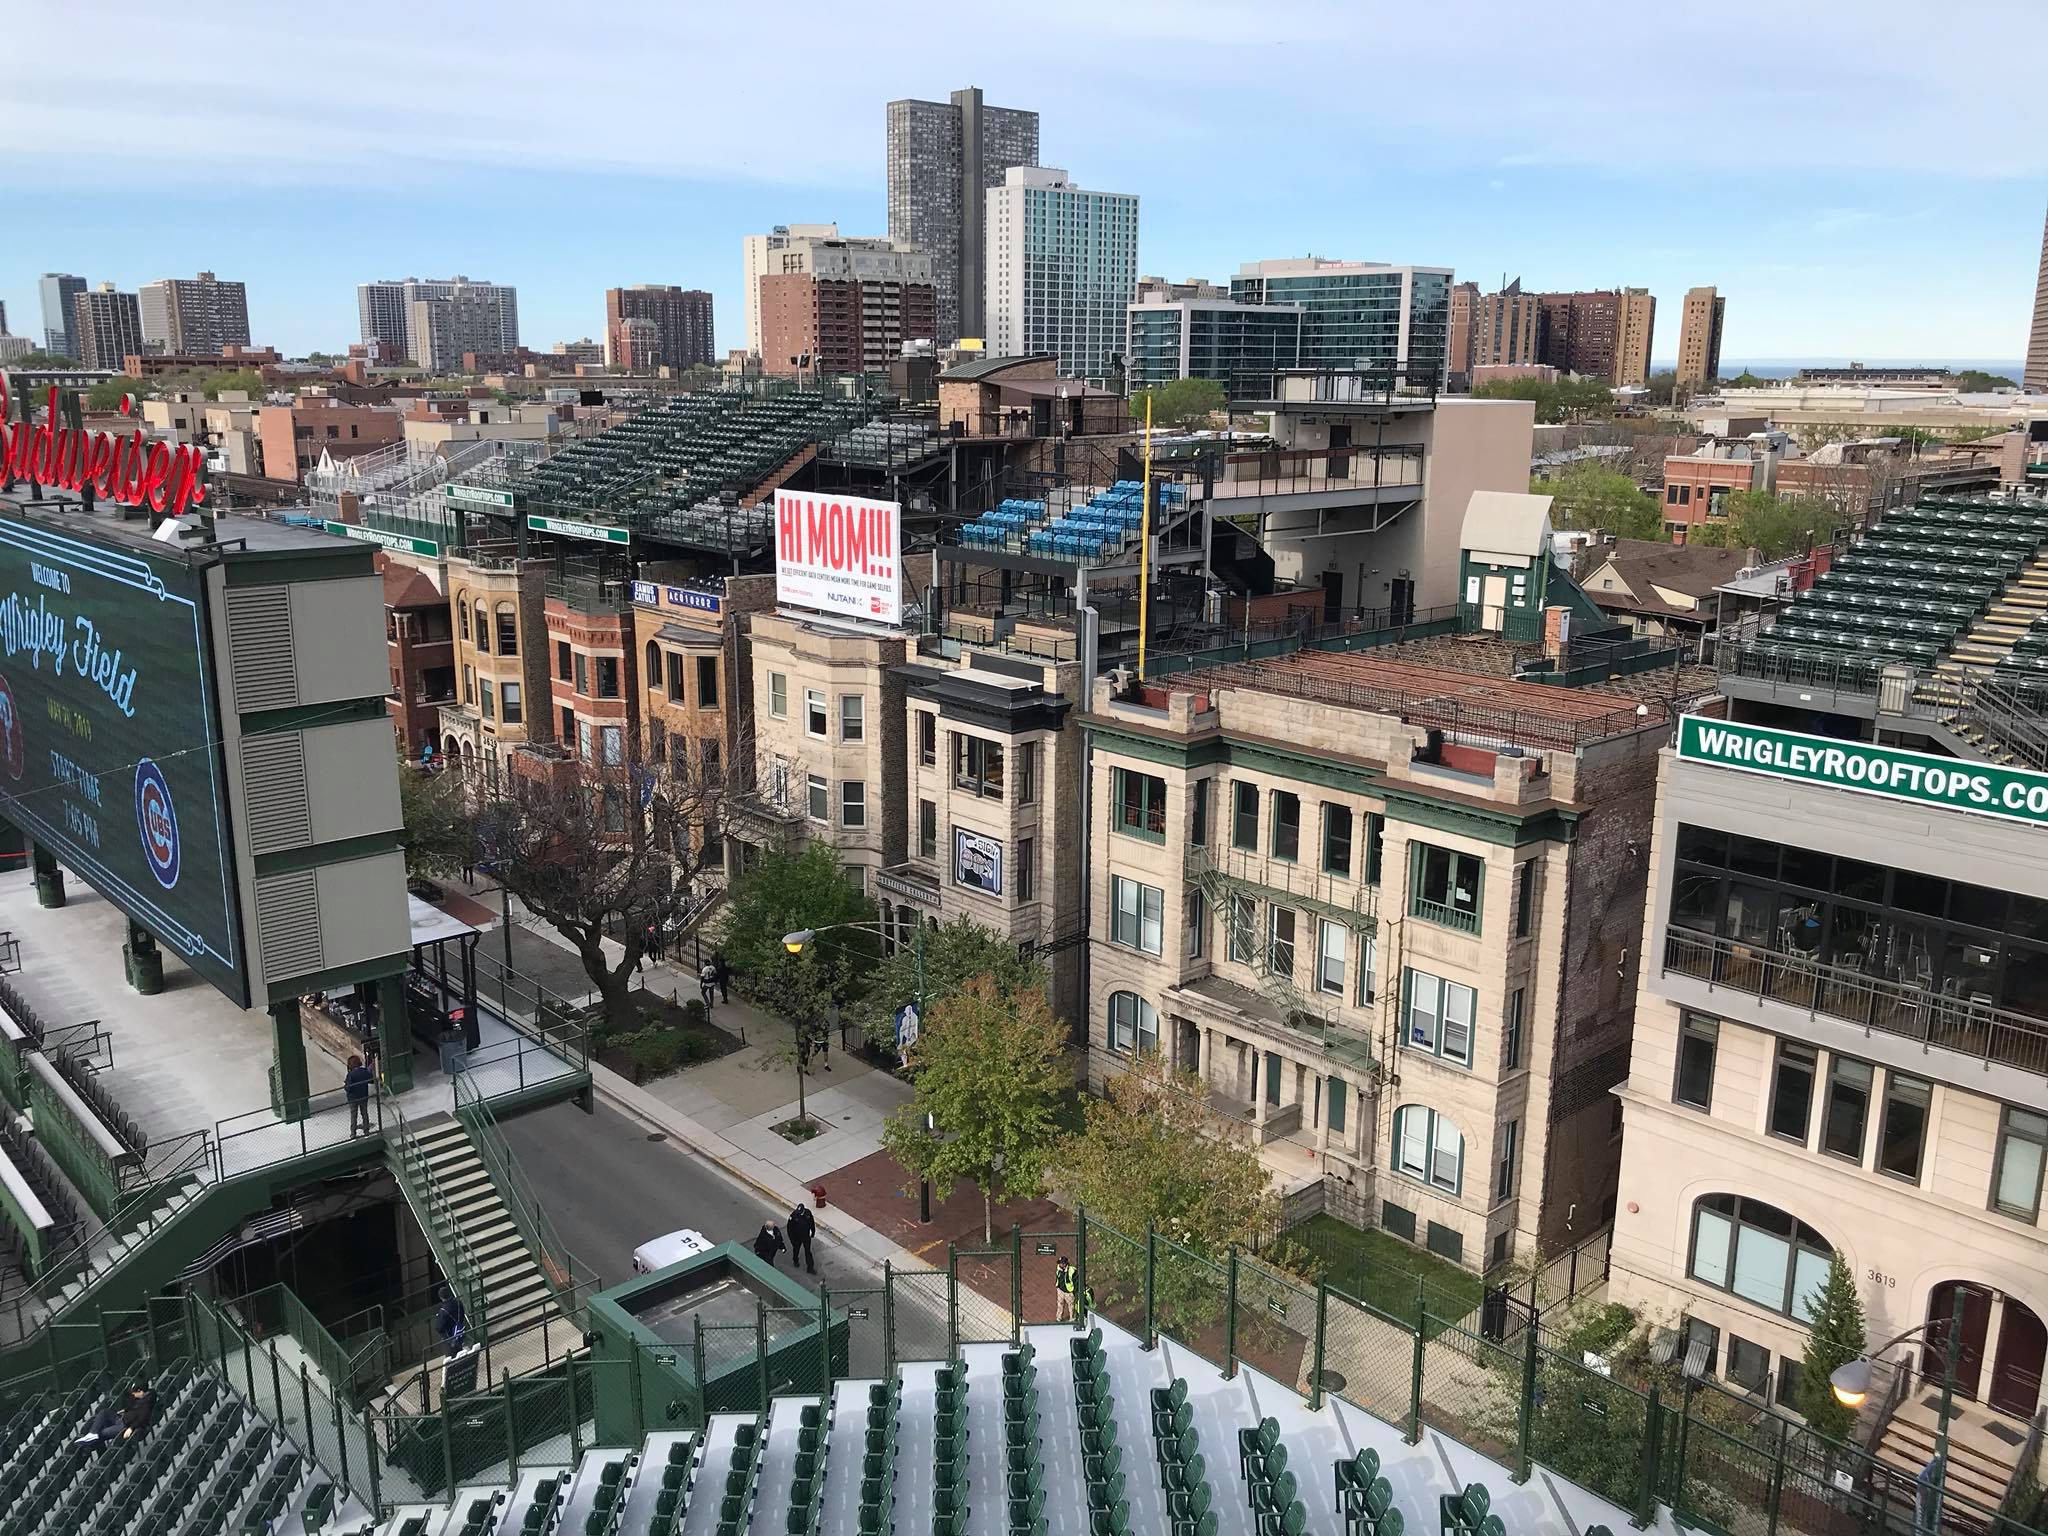 Classic ballparks like Wrigley Field are venerated because of their connection to local neighborhoods.  While even the best post-1990 ballparks cannot emulate this, location and local scene are paramount.  